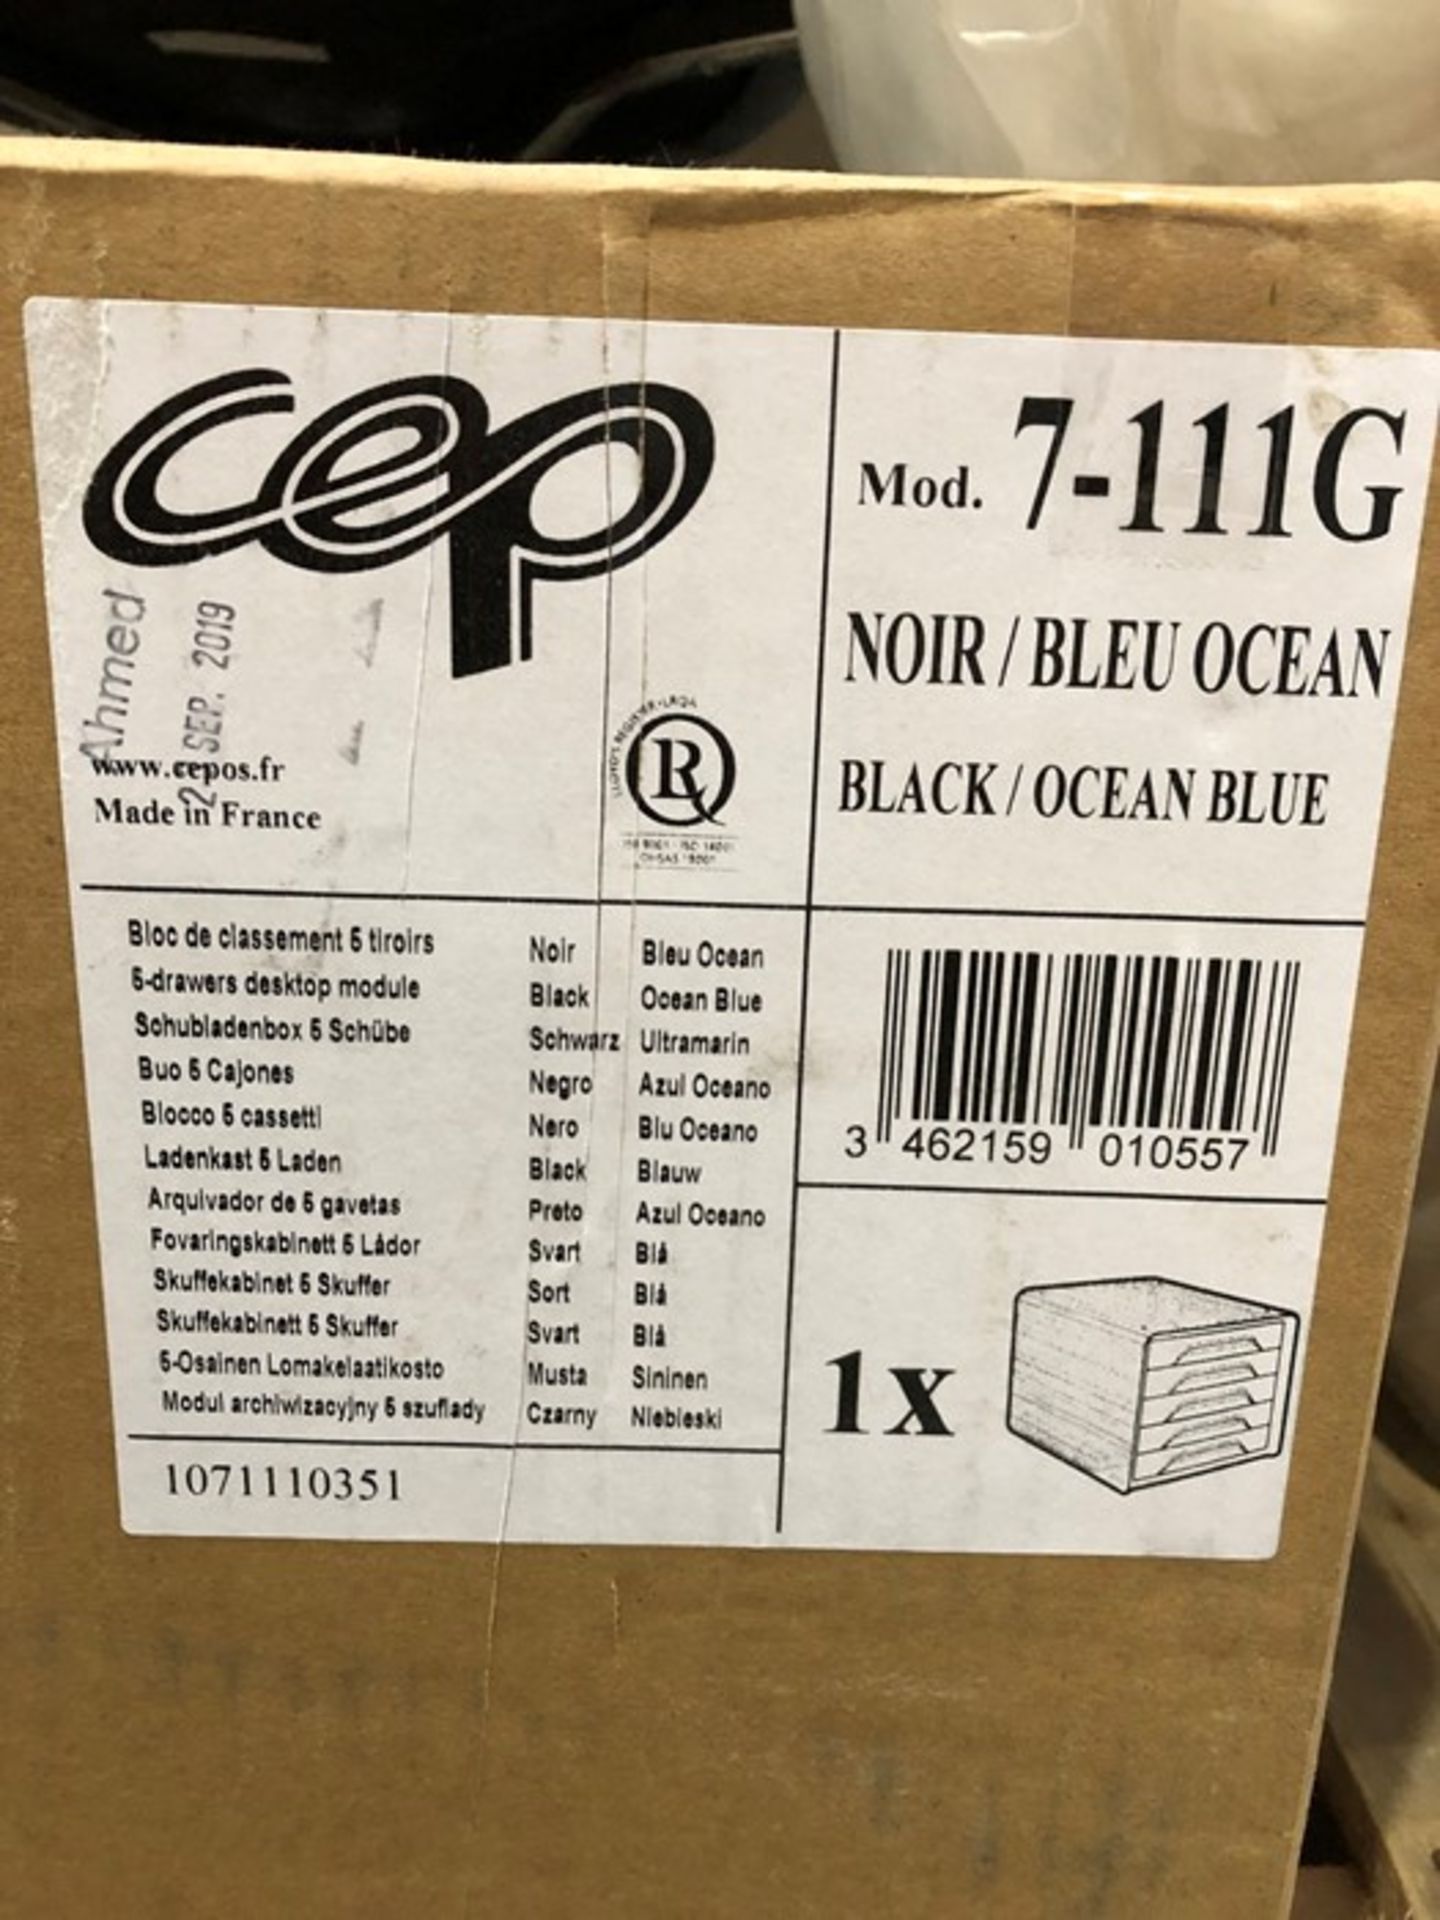 1 BOXED CEP PLASTIC PAPER STORAGE TRAYS - OCEAN BLUE AND BLACK (PUBLIC VIEWING AVAILABLE)